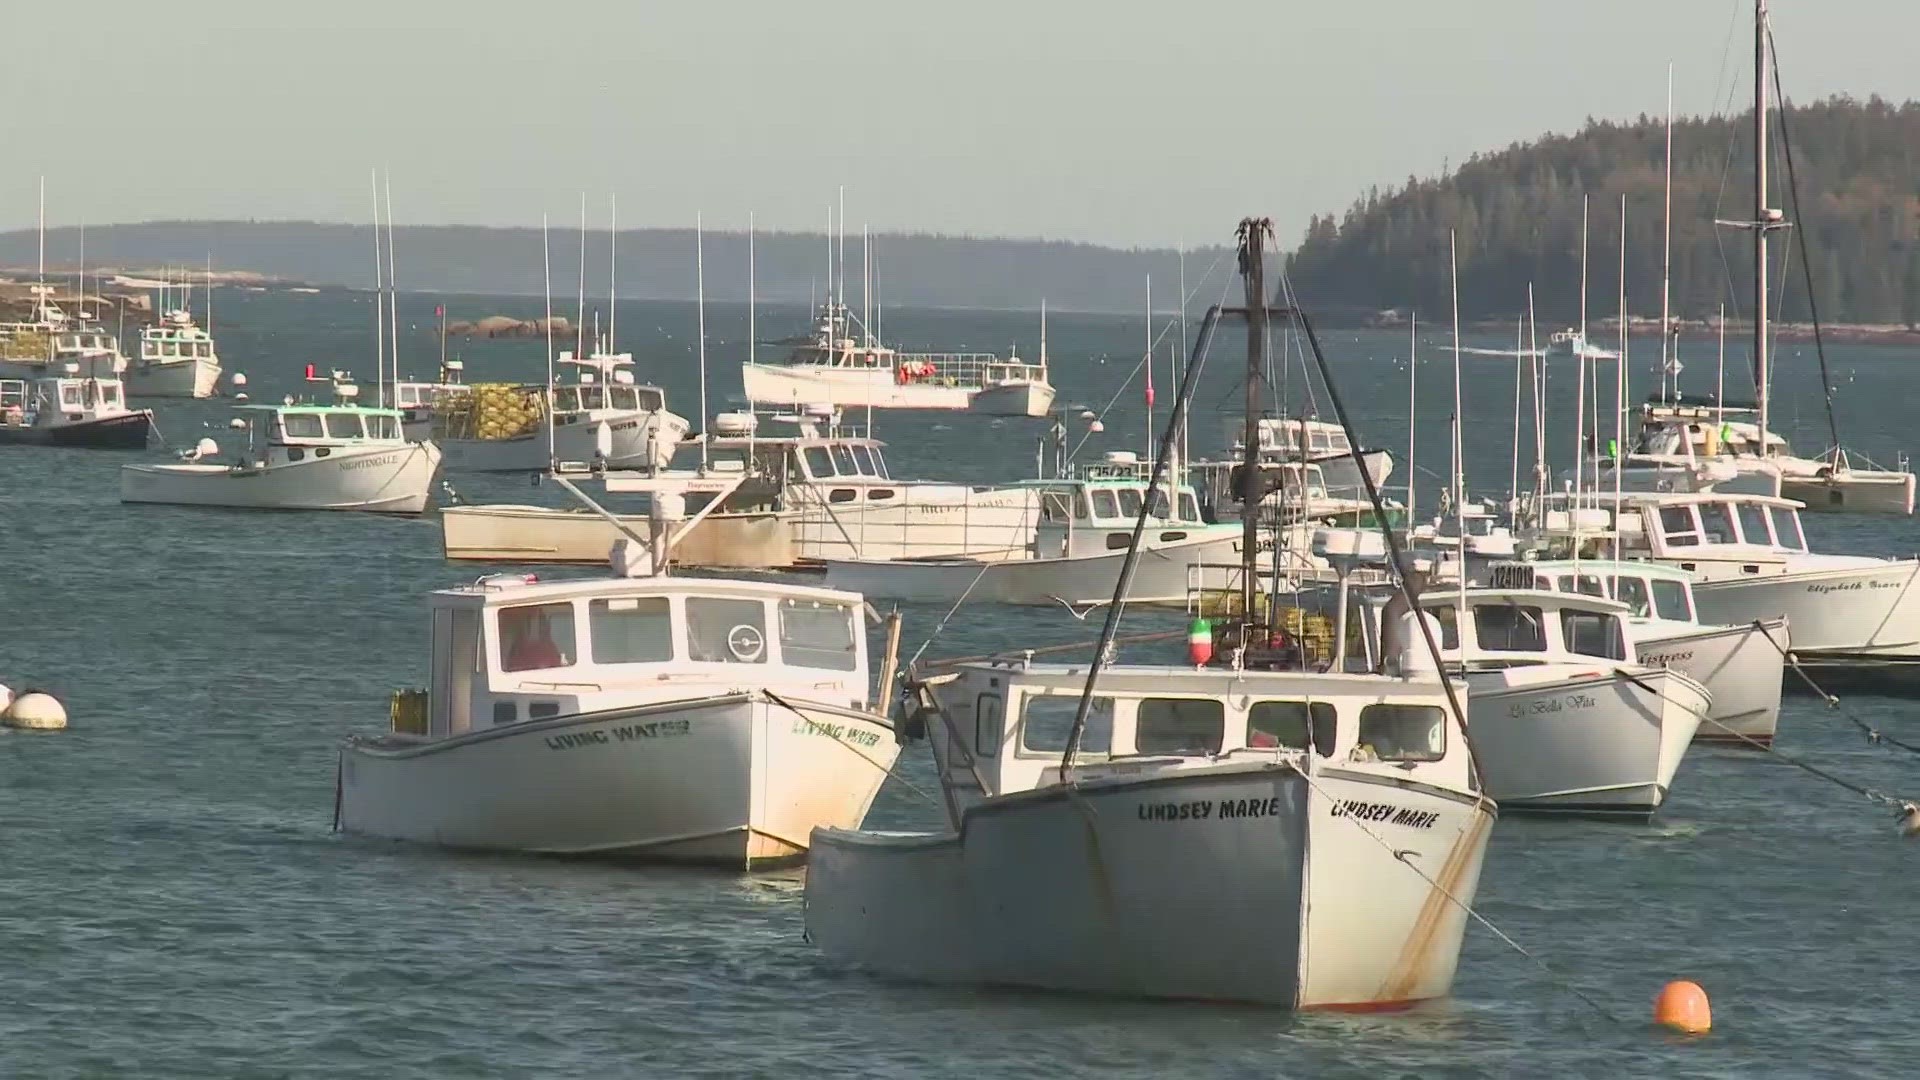 The Marine Resources Commissioner says the low price of lobster and high fuel costs contributed to low catch numbers.